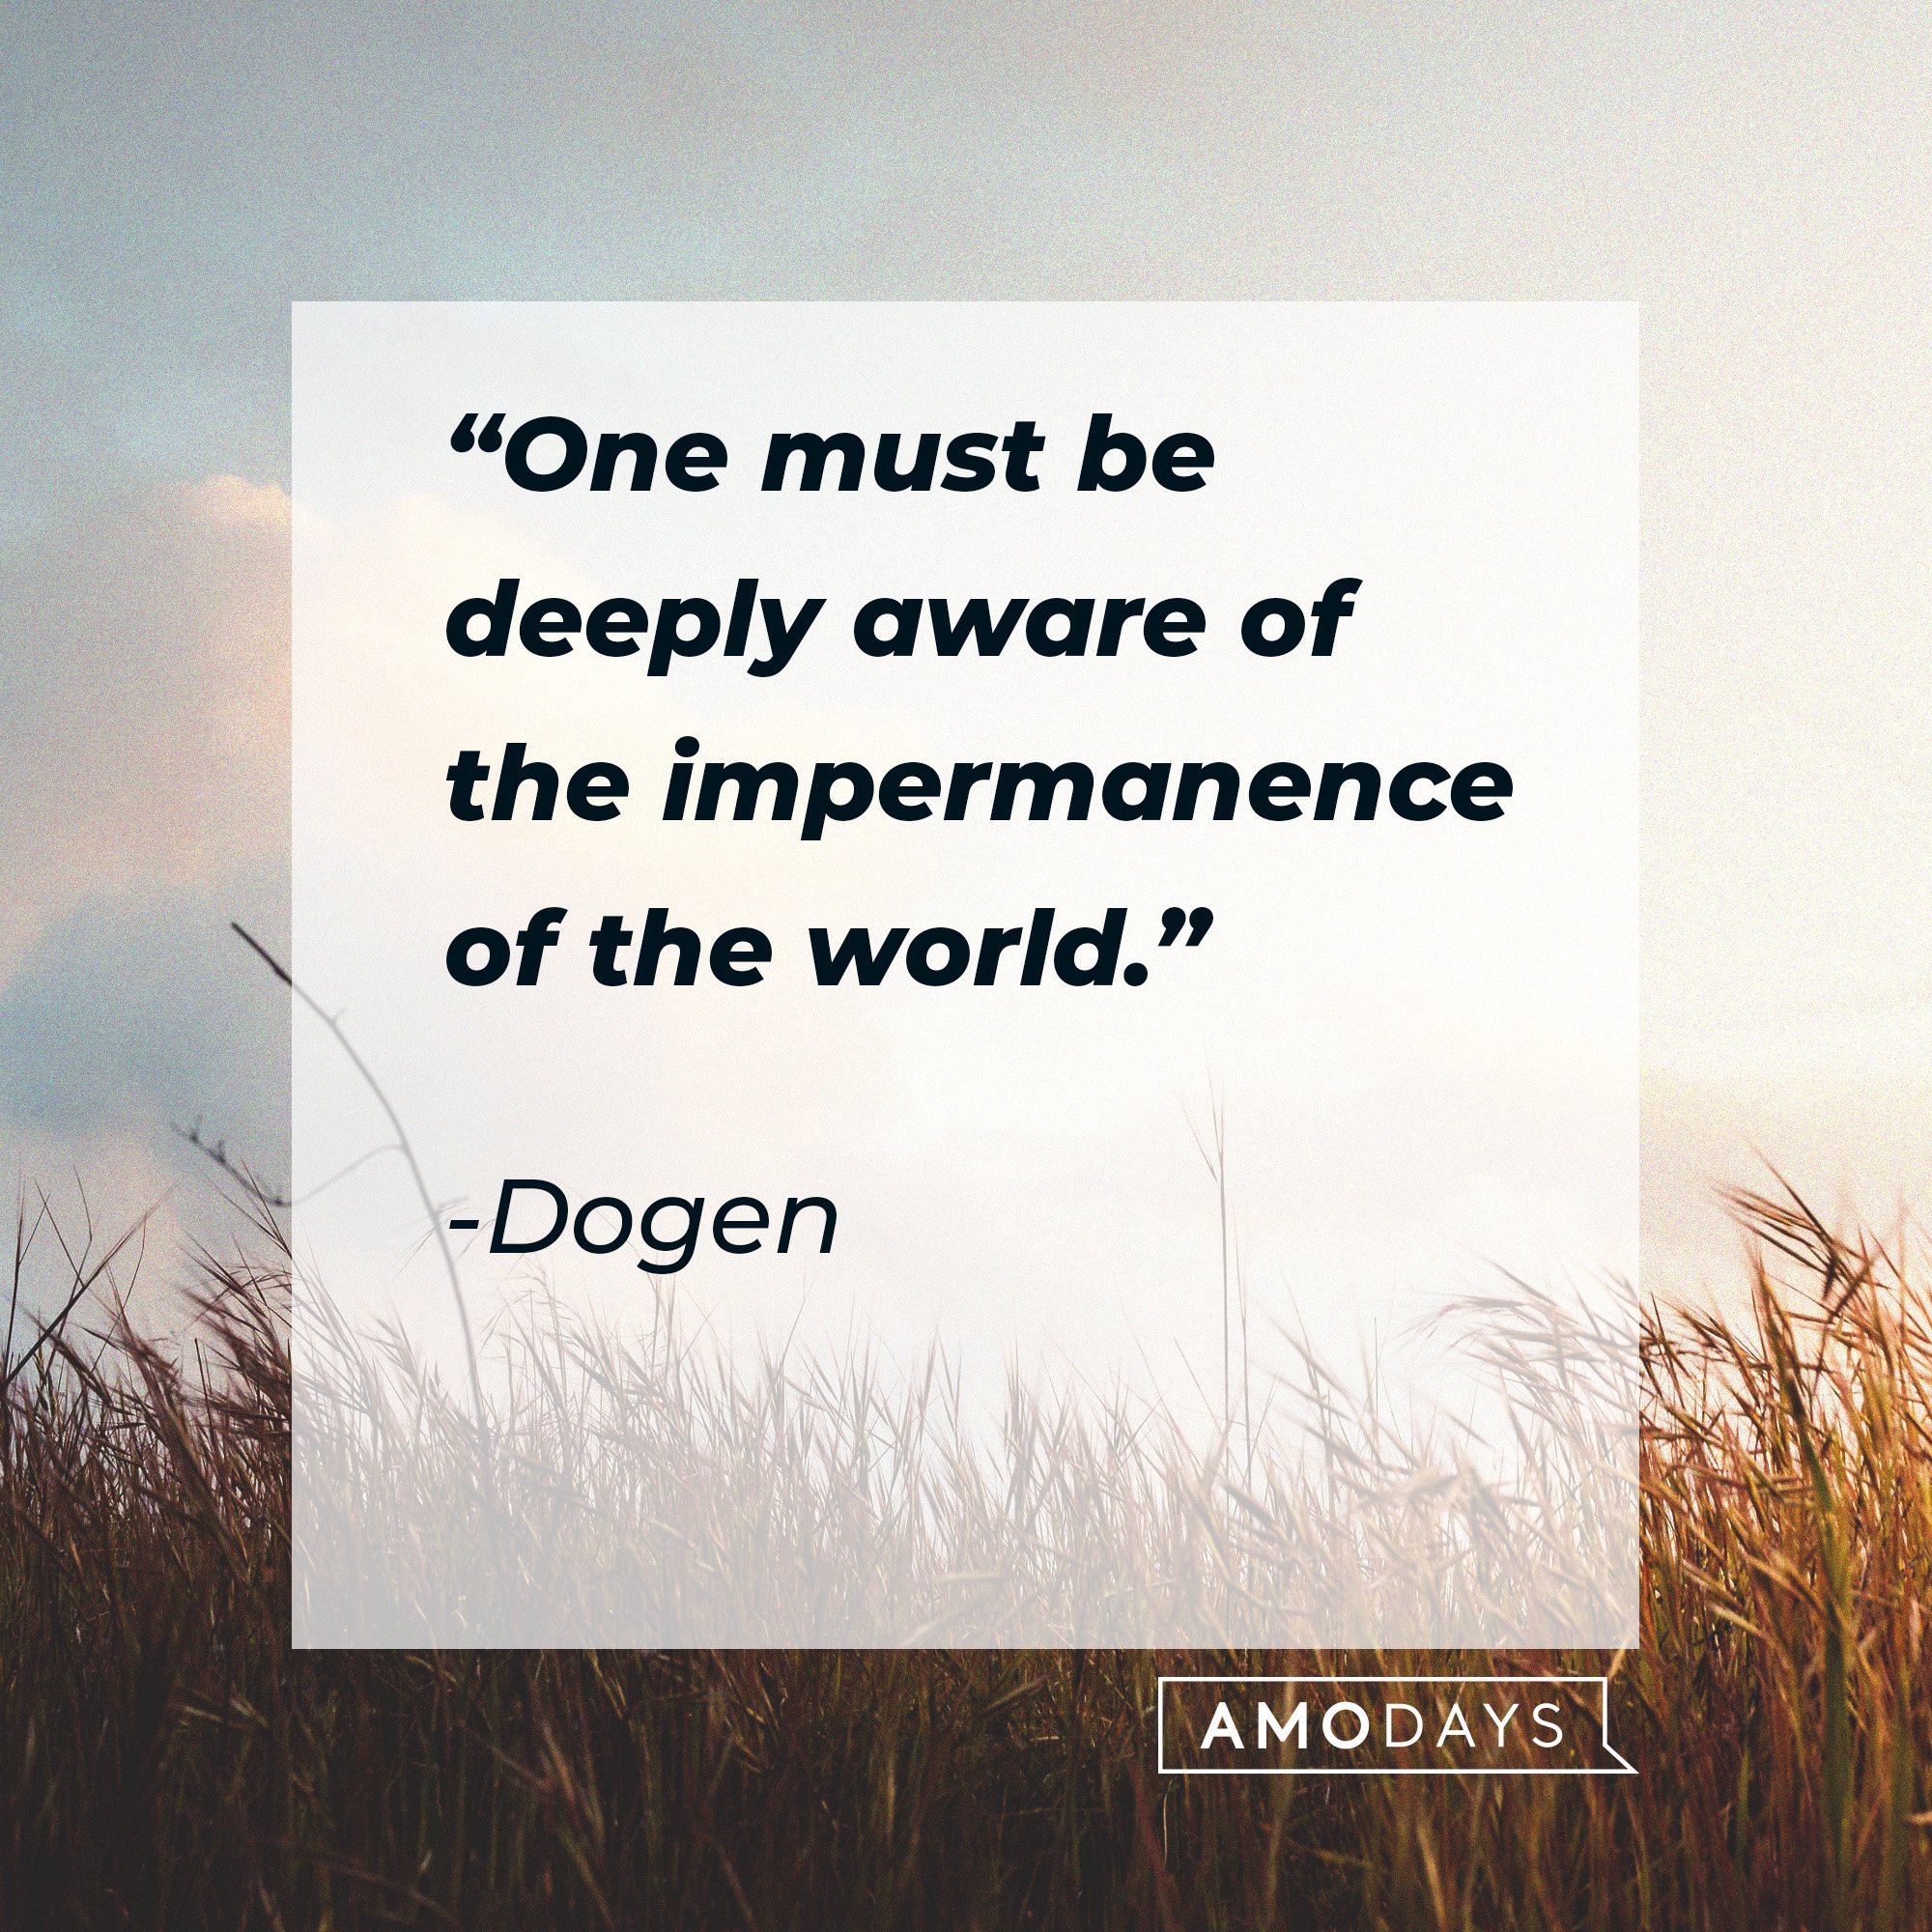  Dogen's quote: “One must be deeply aware of the impermanence of the world.” | Image: AmoDays